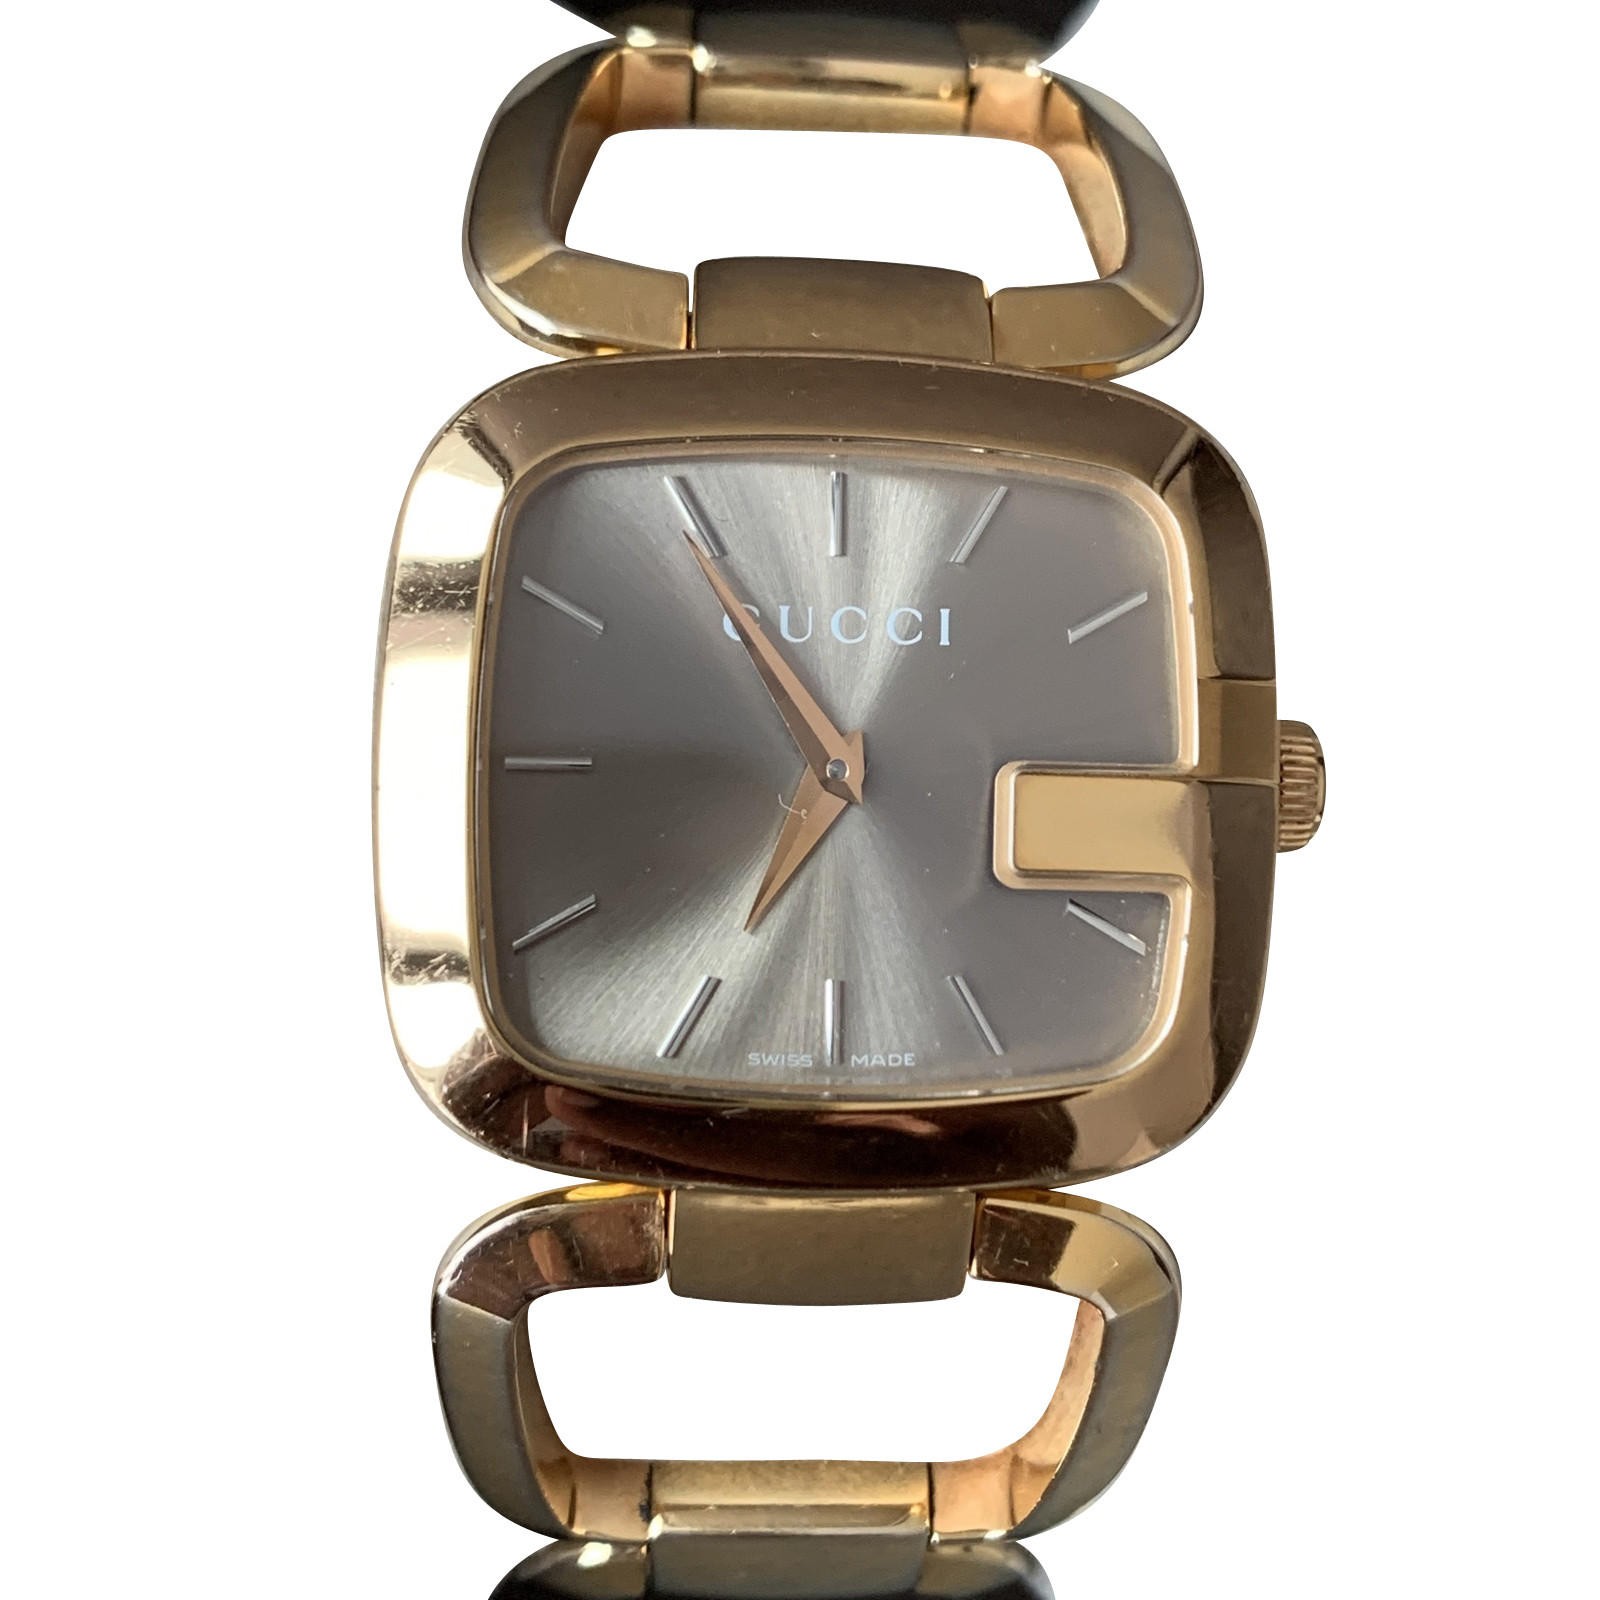 Gucci Watch in Gold - Second Hand Gucci Watch in Gold buy used for 450€  (4649049)